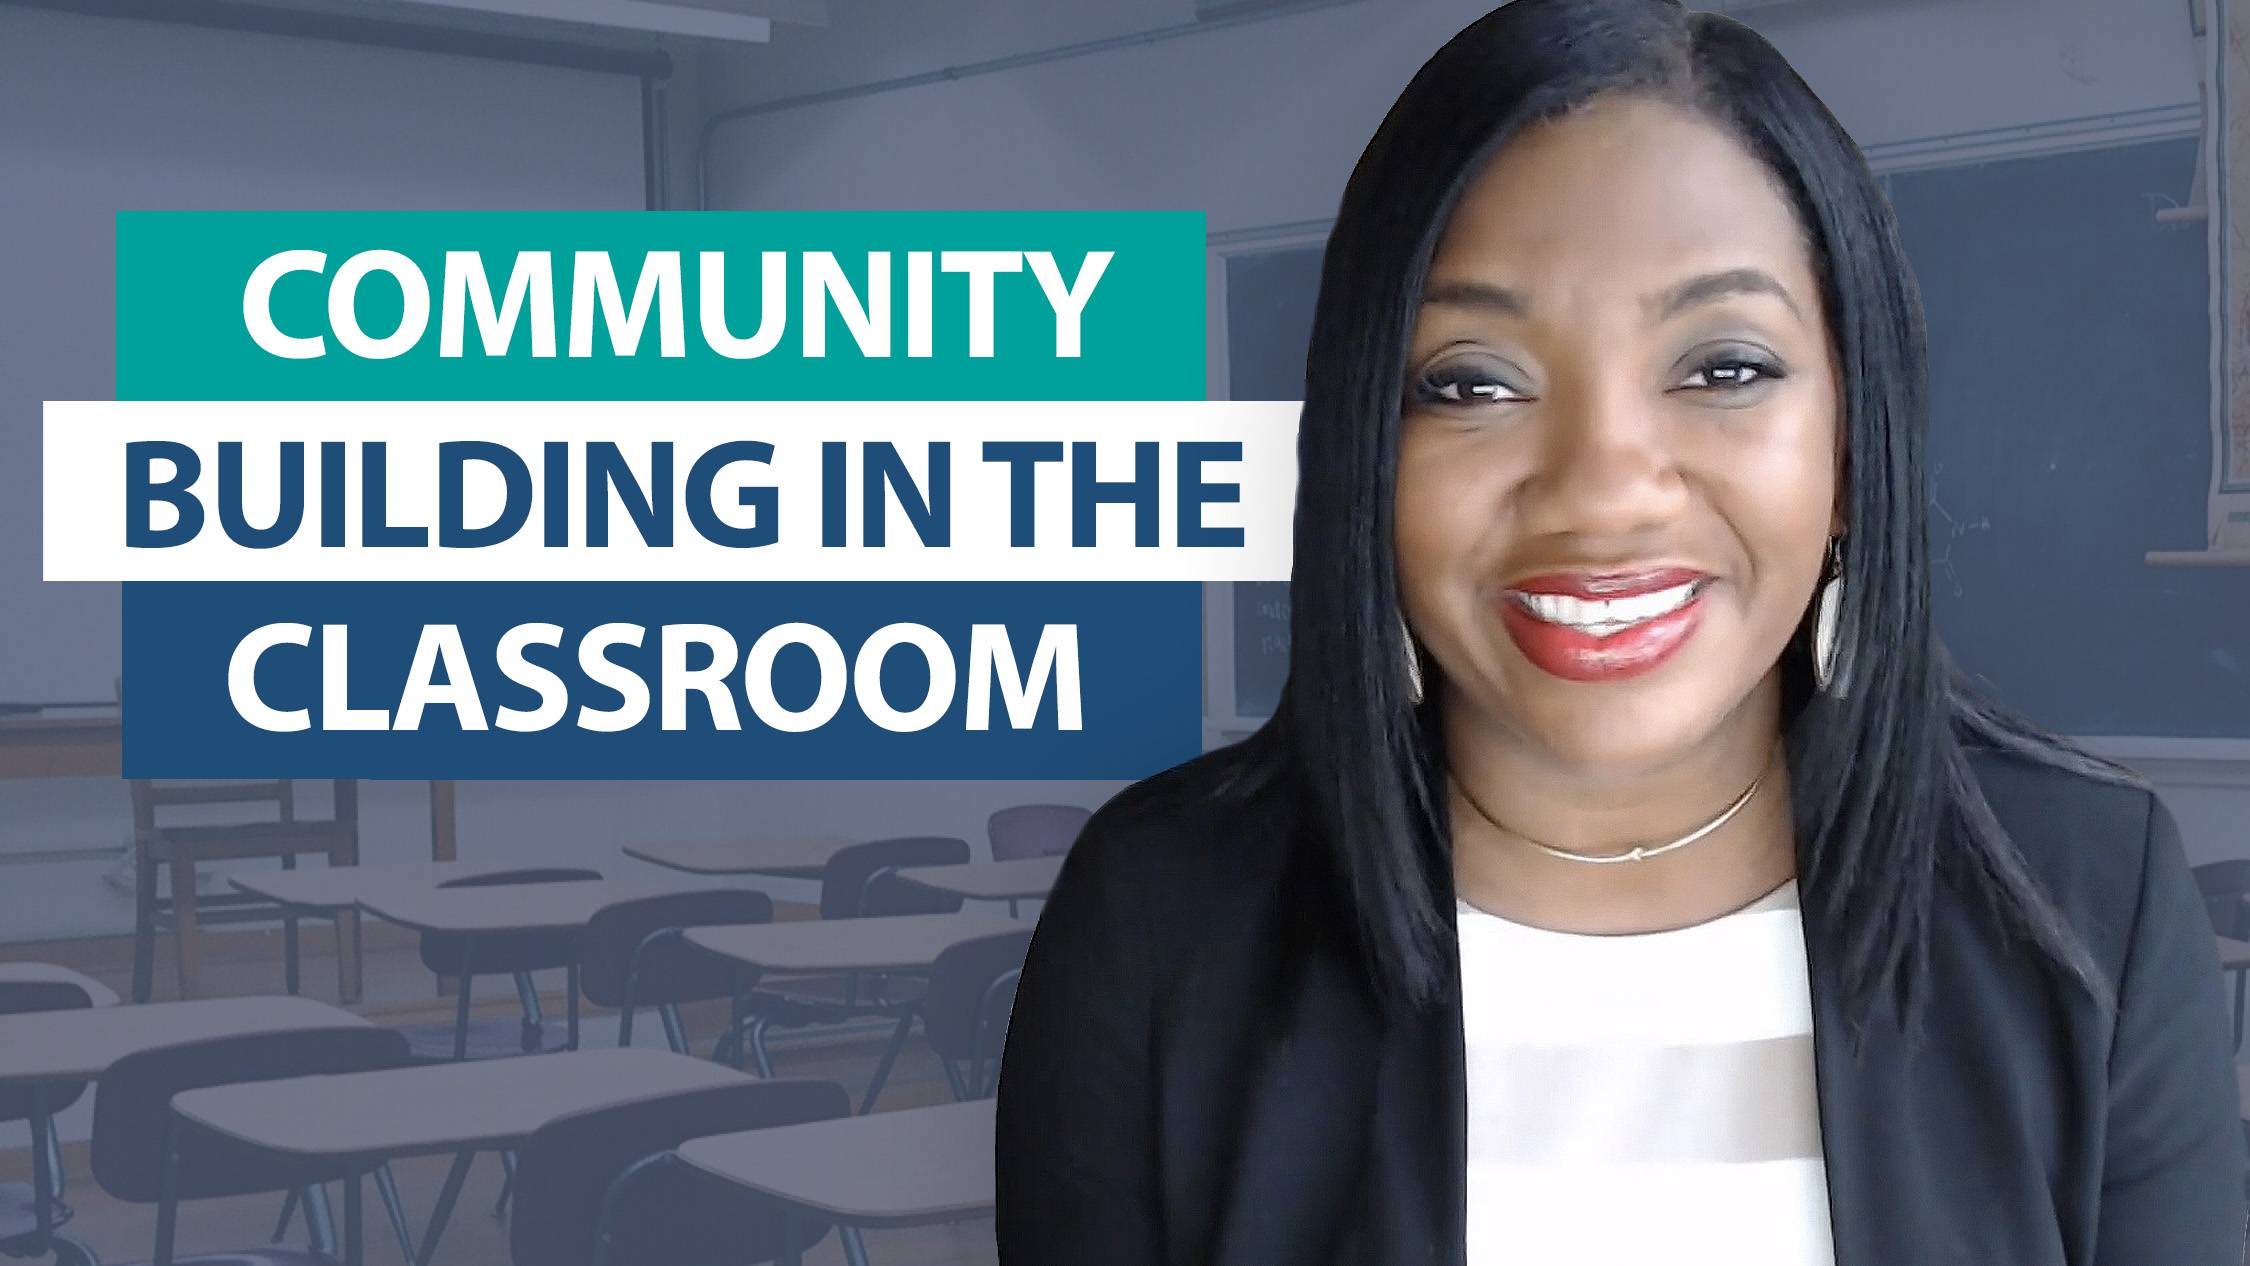 Ask Smekens: How can I make community building part of my classroom?